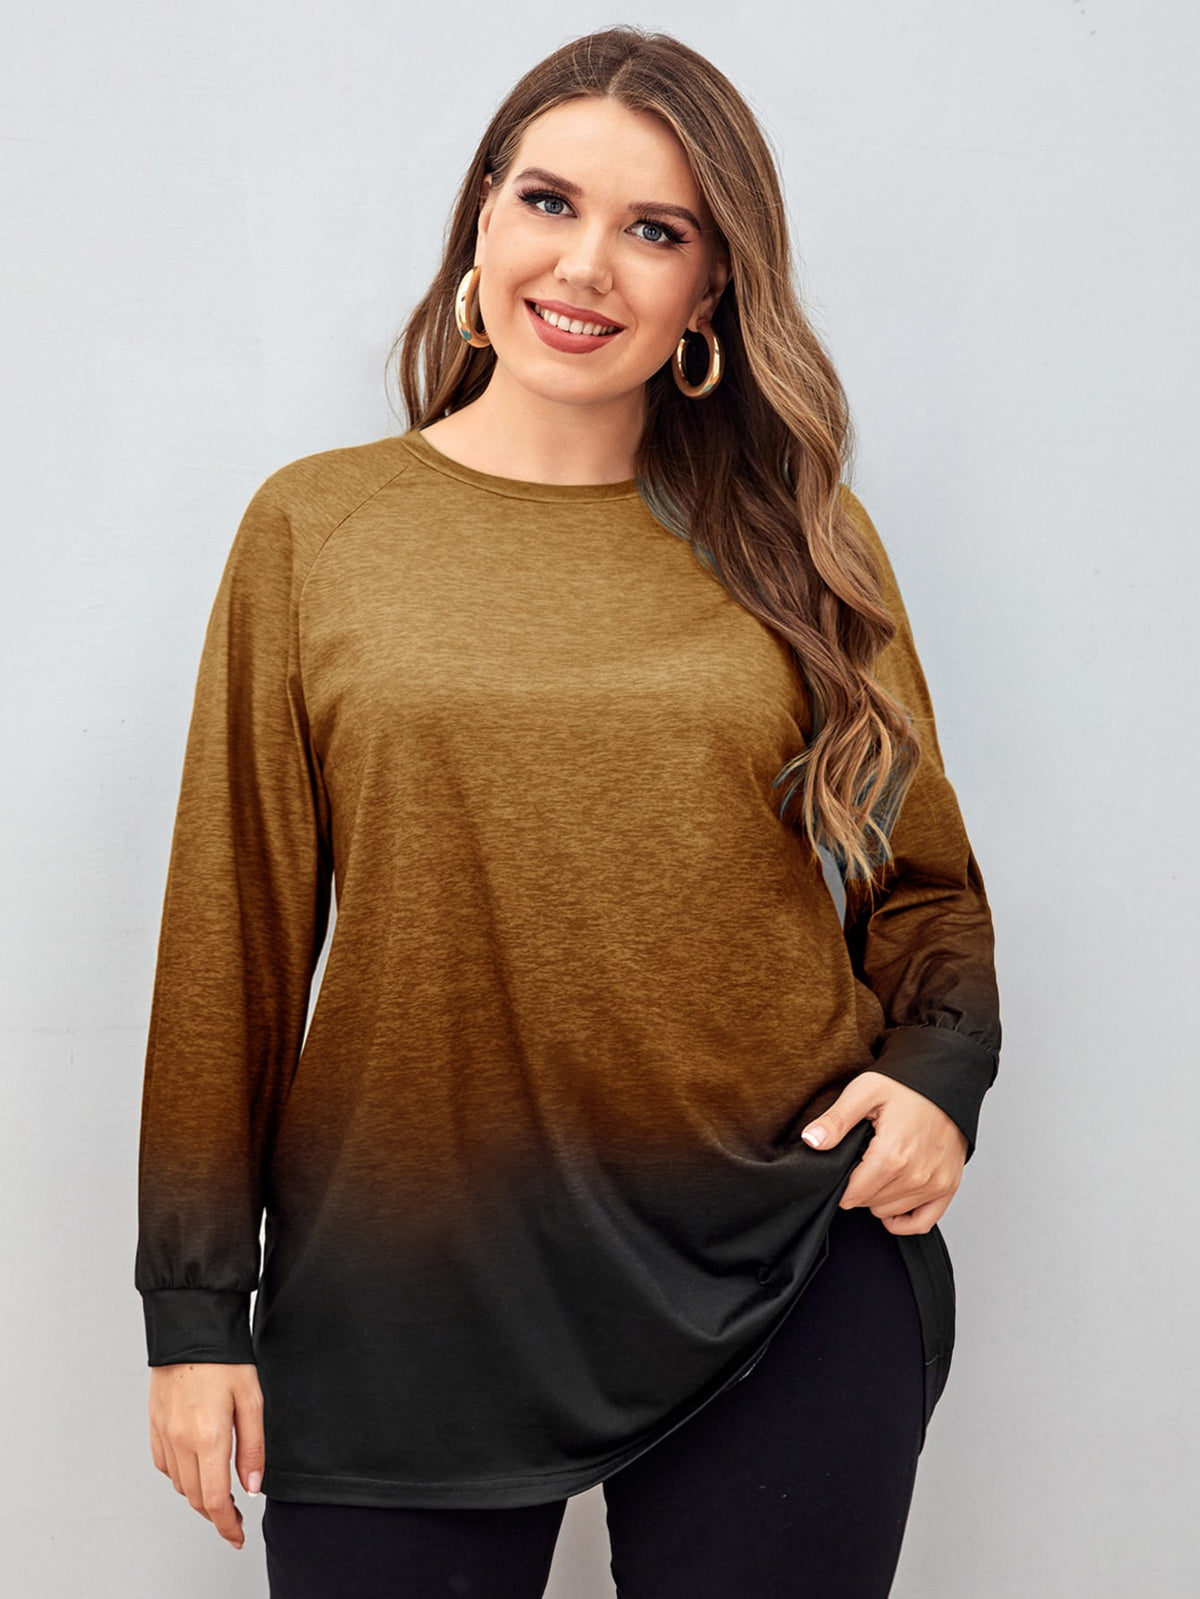 Plus Size Two Tone Tee with Raglan Sleeve - Multicolor-5 / 4XL